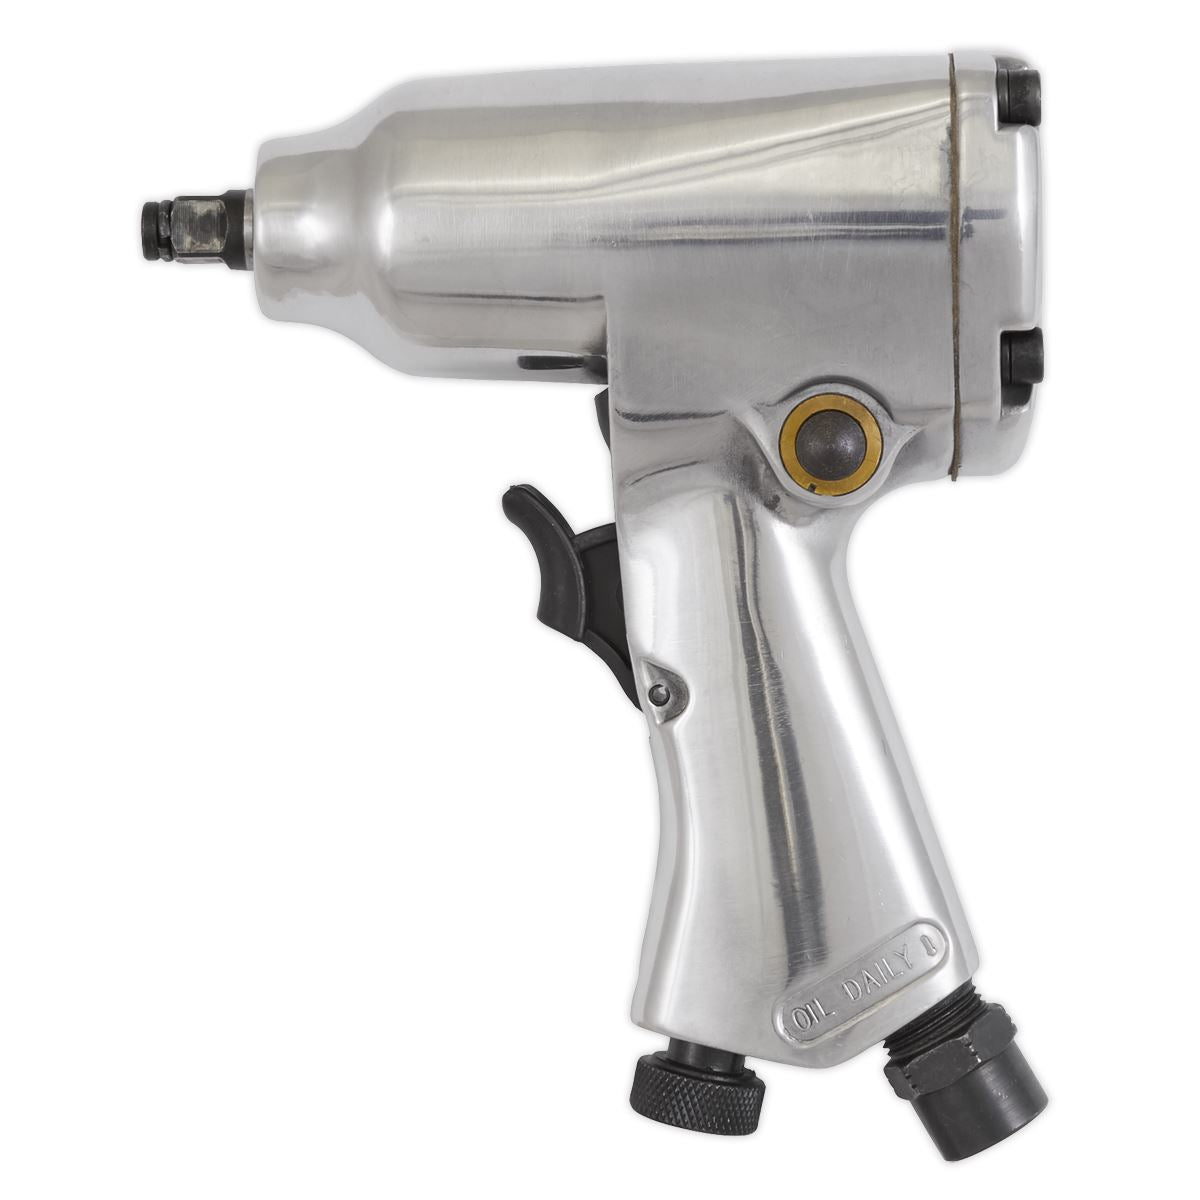 Sealey 3/8" Square Drive Heavy-Duty Air Impact Wrench